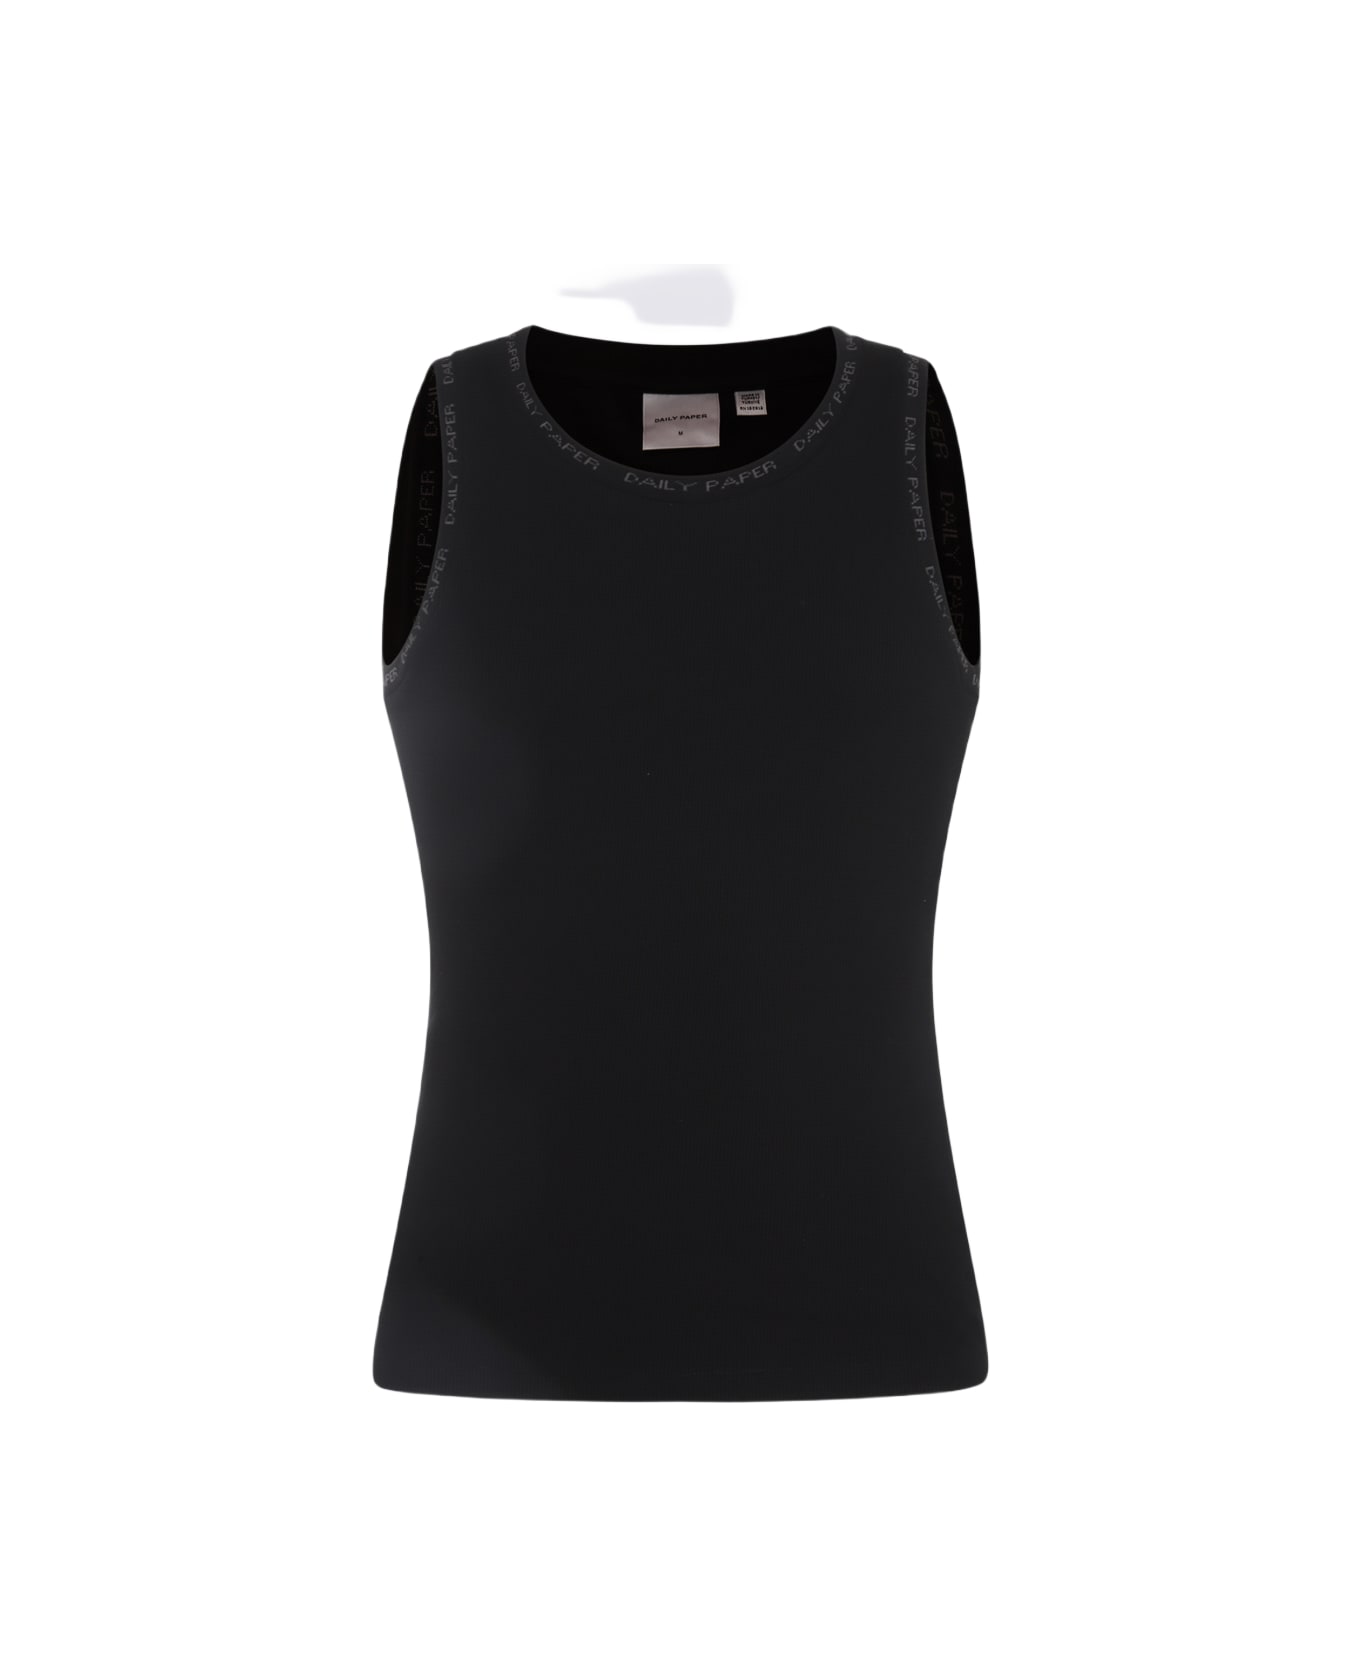 Daily Paper Black And White Cotton Tank Top - Black